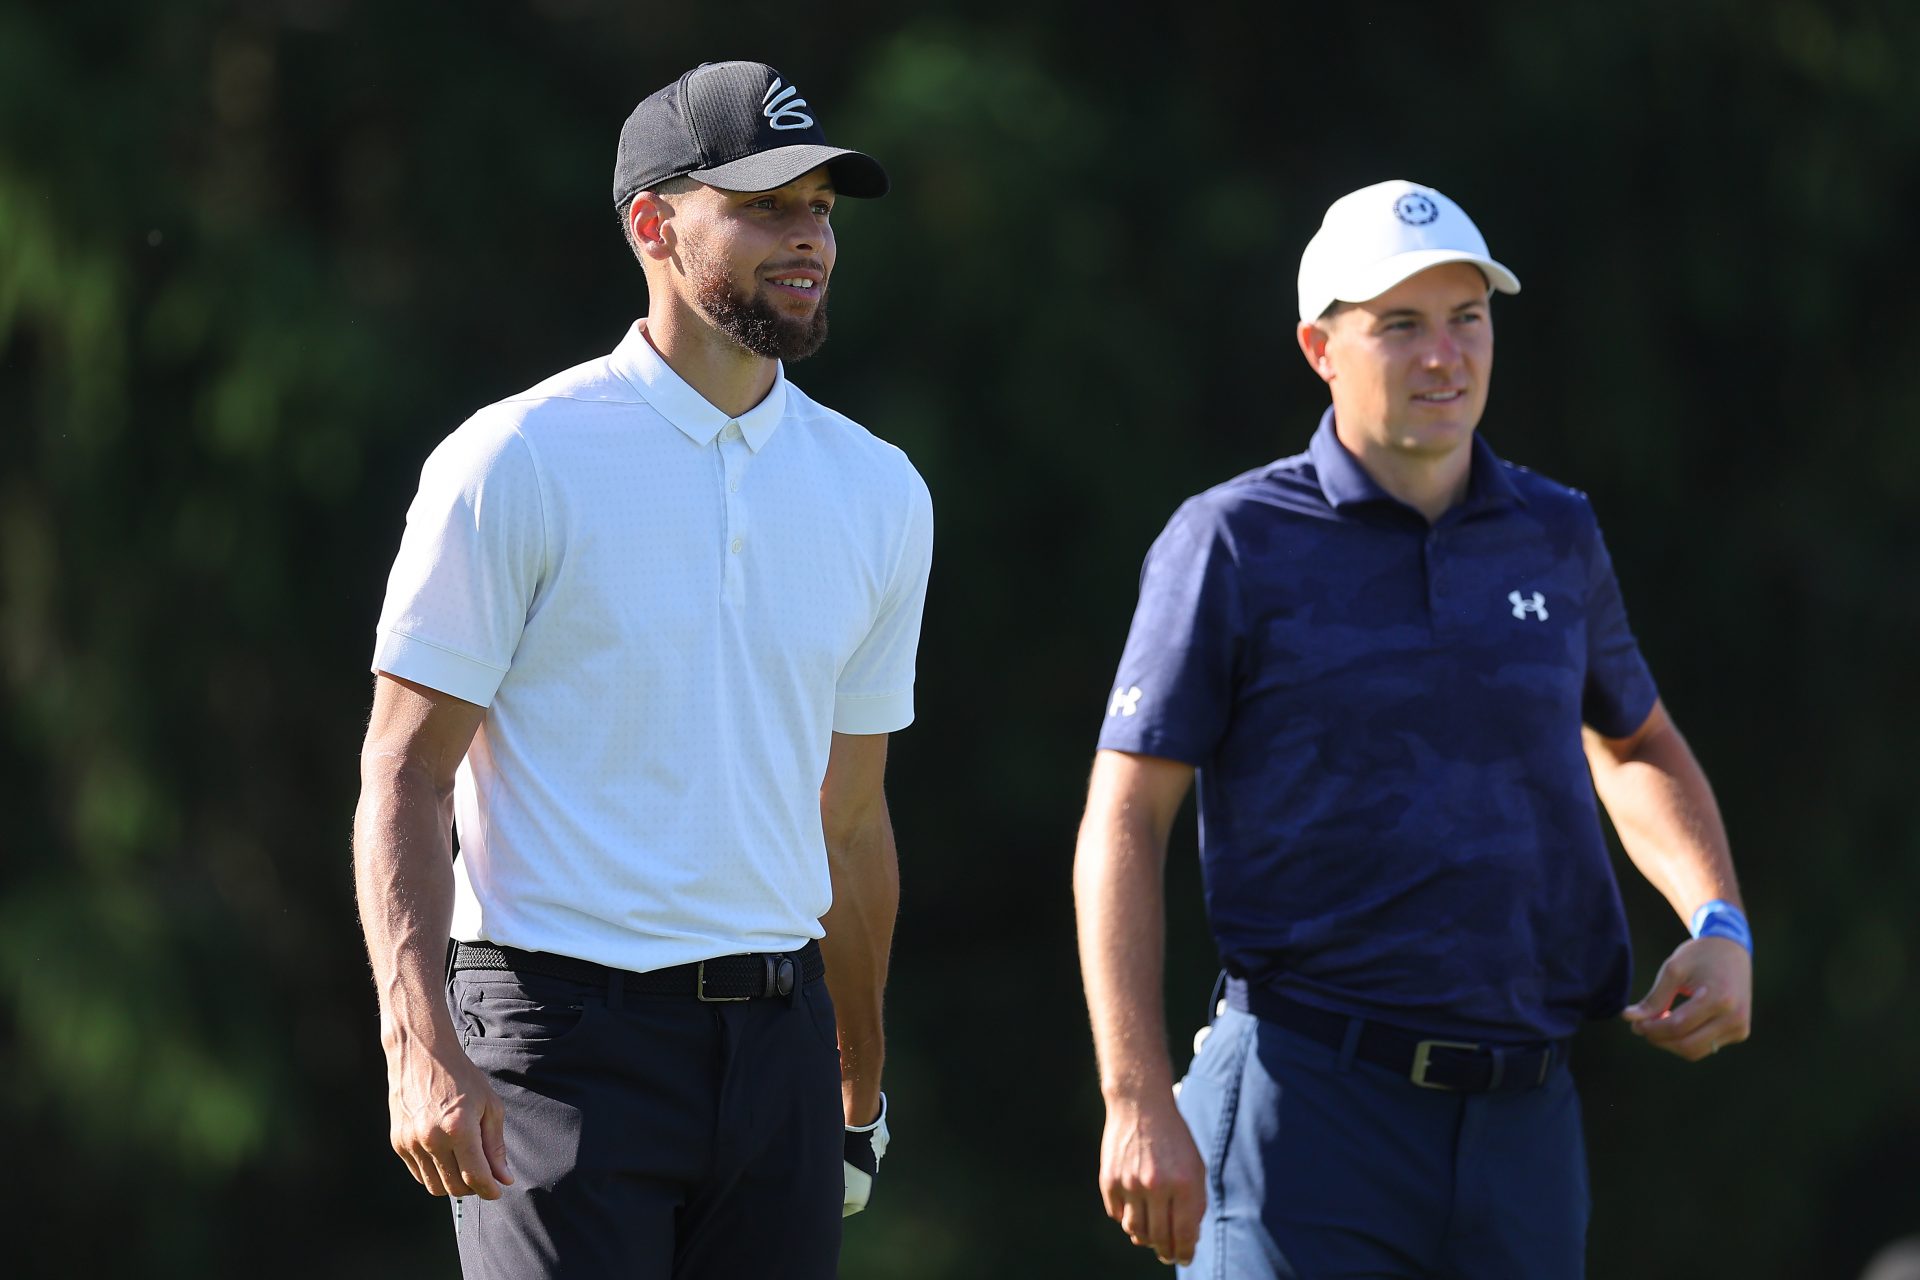 Jordan, Curry, Kane? Which superstar athletes would crack it in the golf world